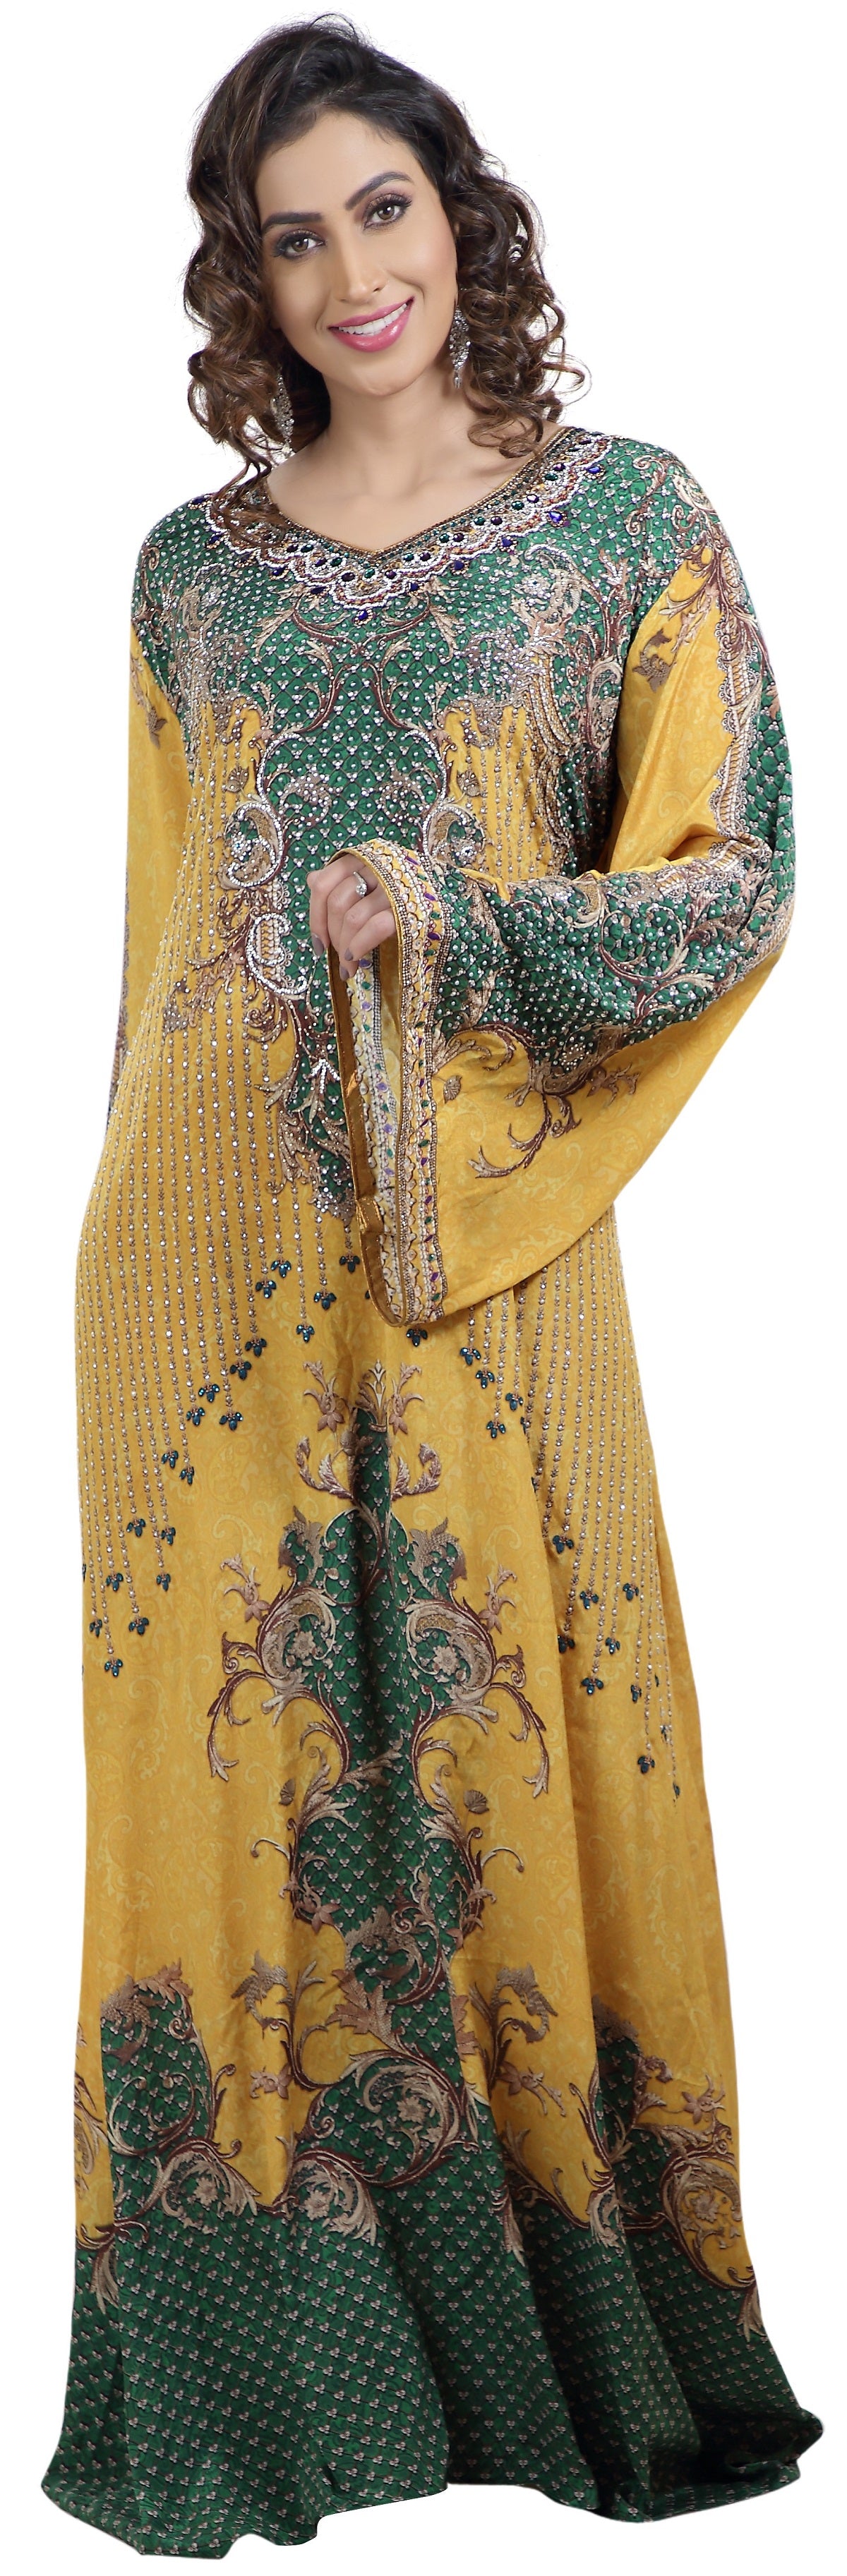 Yellow Printed Kaftan with Crystal Luxe Beads - Maxim Creation